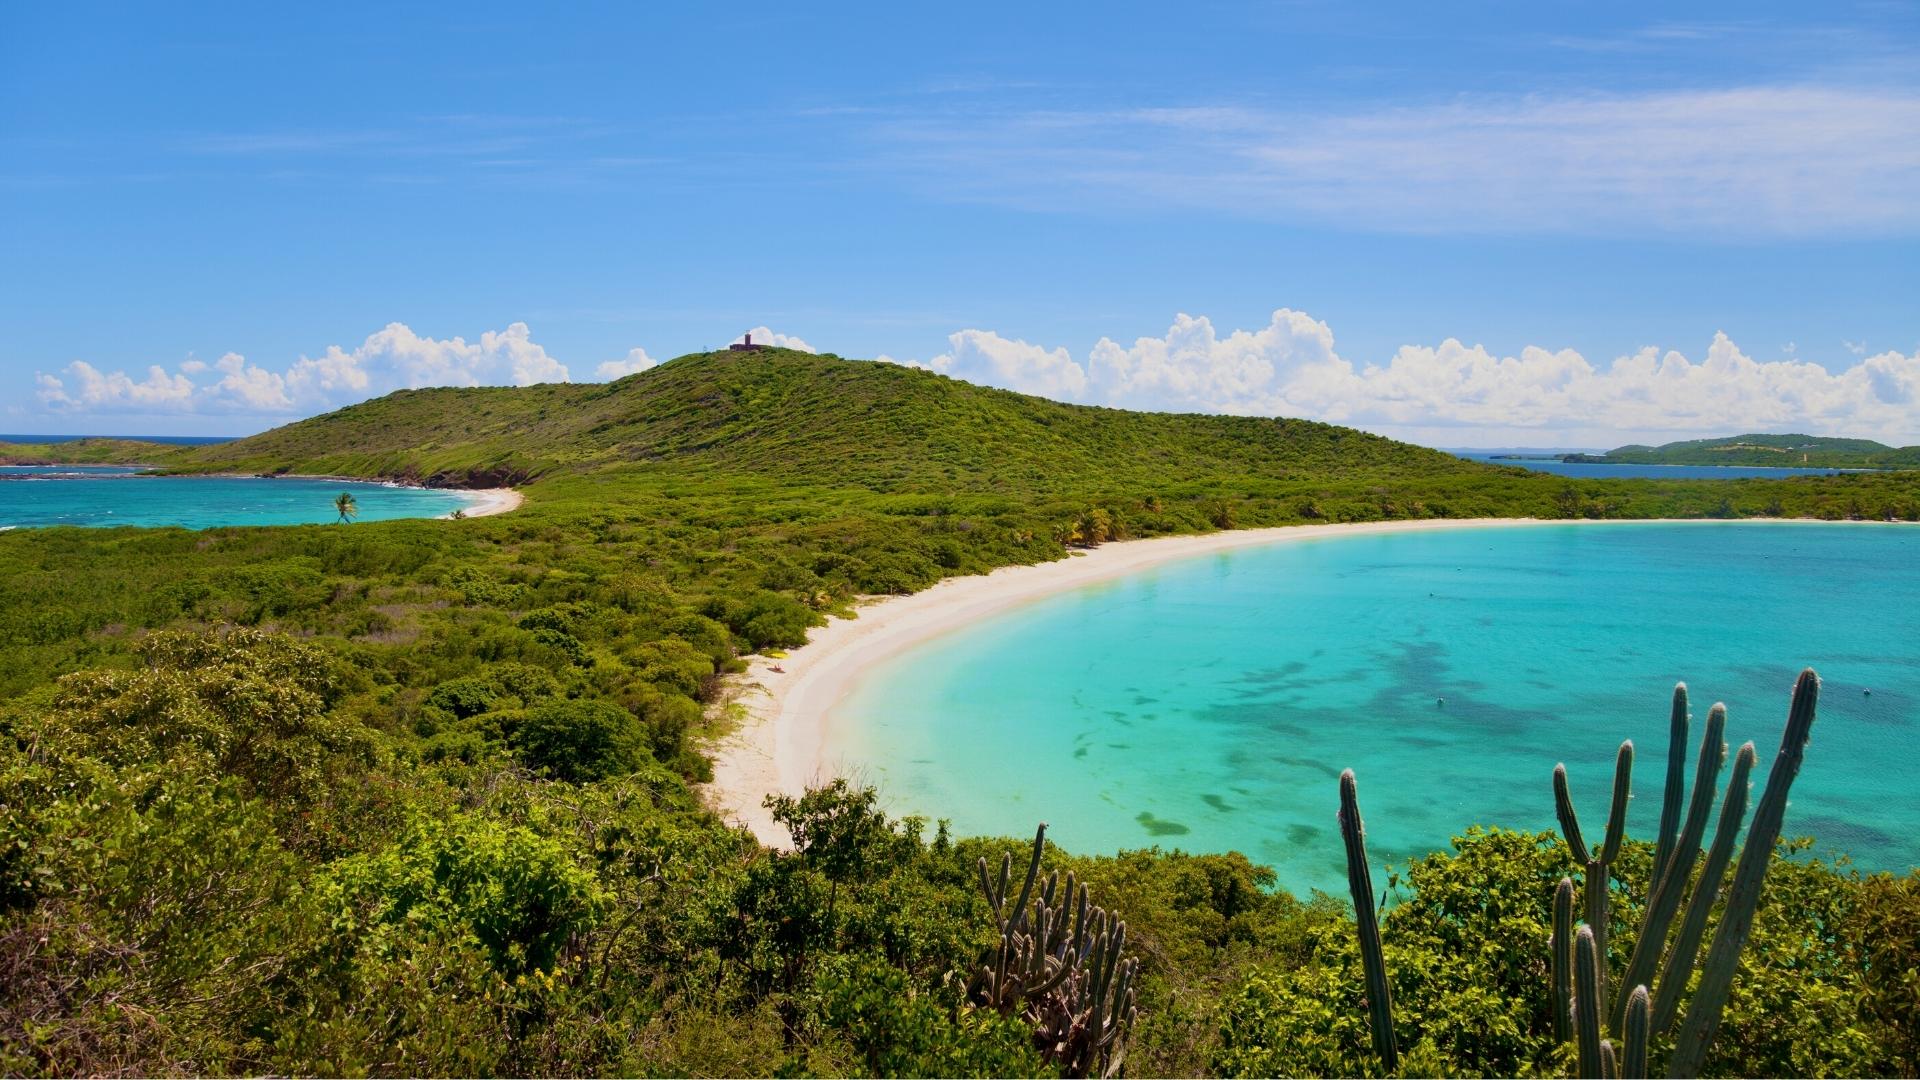 Explore the secluded island of Culebrita in the Spanish Virgin Islands, a paradise of pristine beaches, crystal-clear waters, and historical sights.